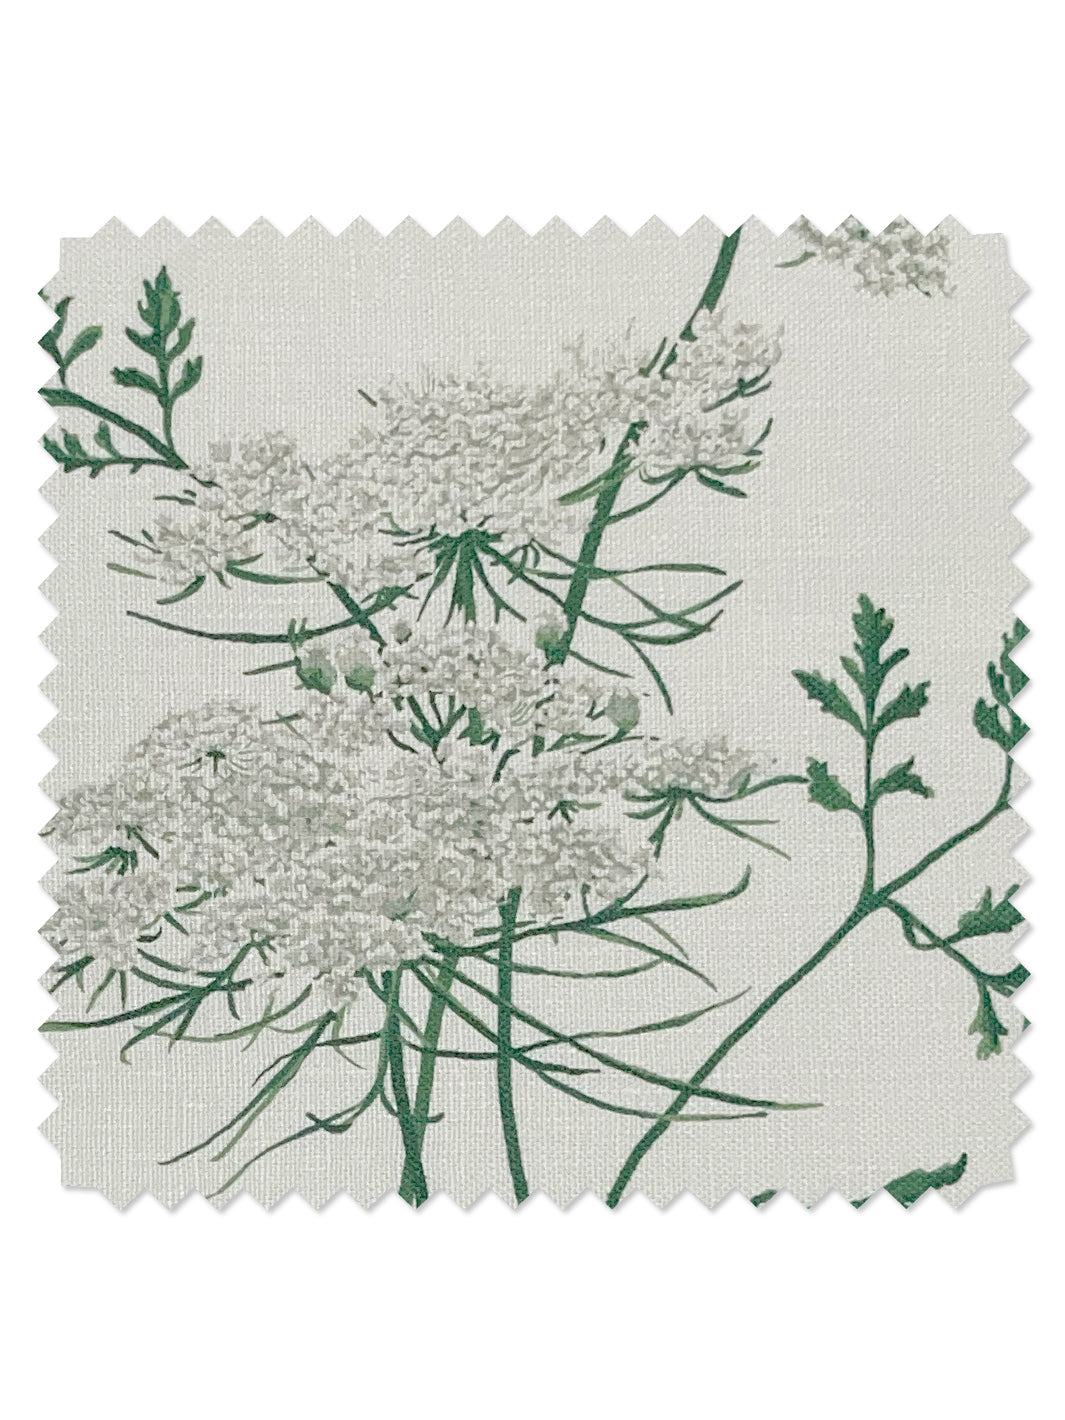 'Queen's Lace' Linen Fabric by Sarah Jessica Parker - Neutral